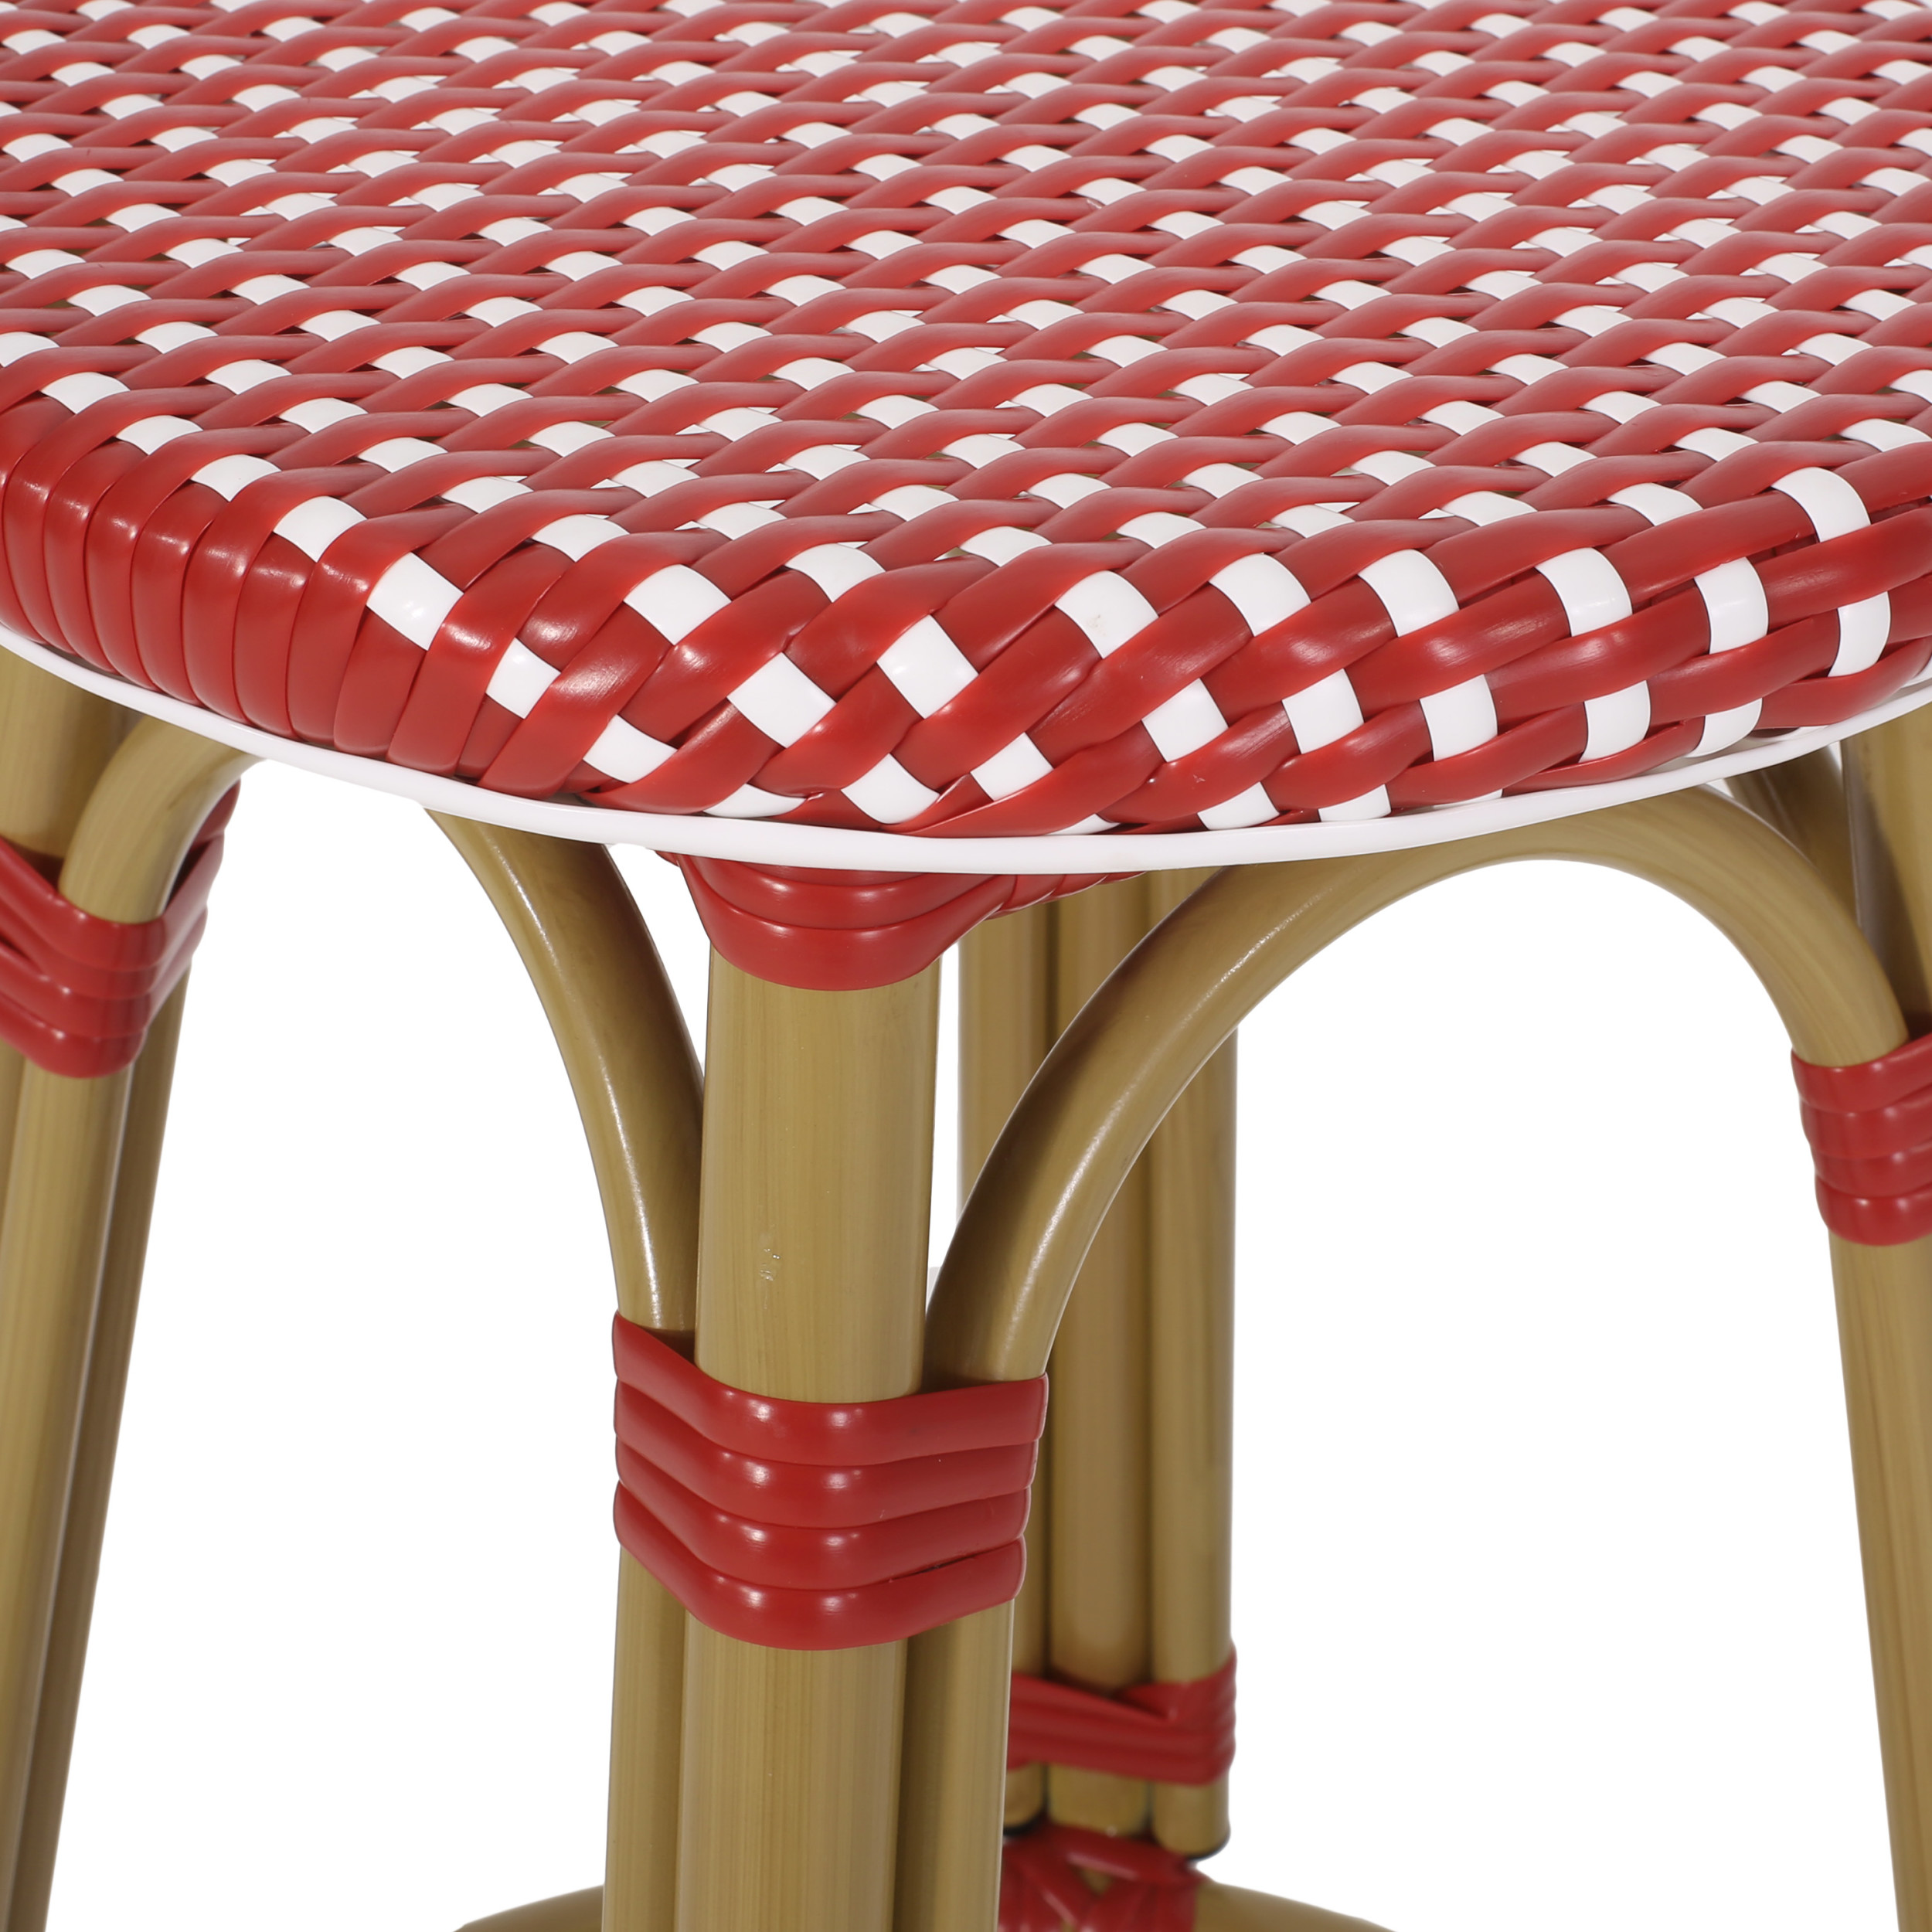 Wilbur Aluminum and Wicker Outdoor 29.5 Inch Barstools, Set of 2, Red, White, and Bamboo Finish - image 4 of 7